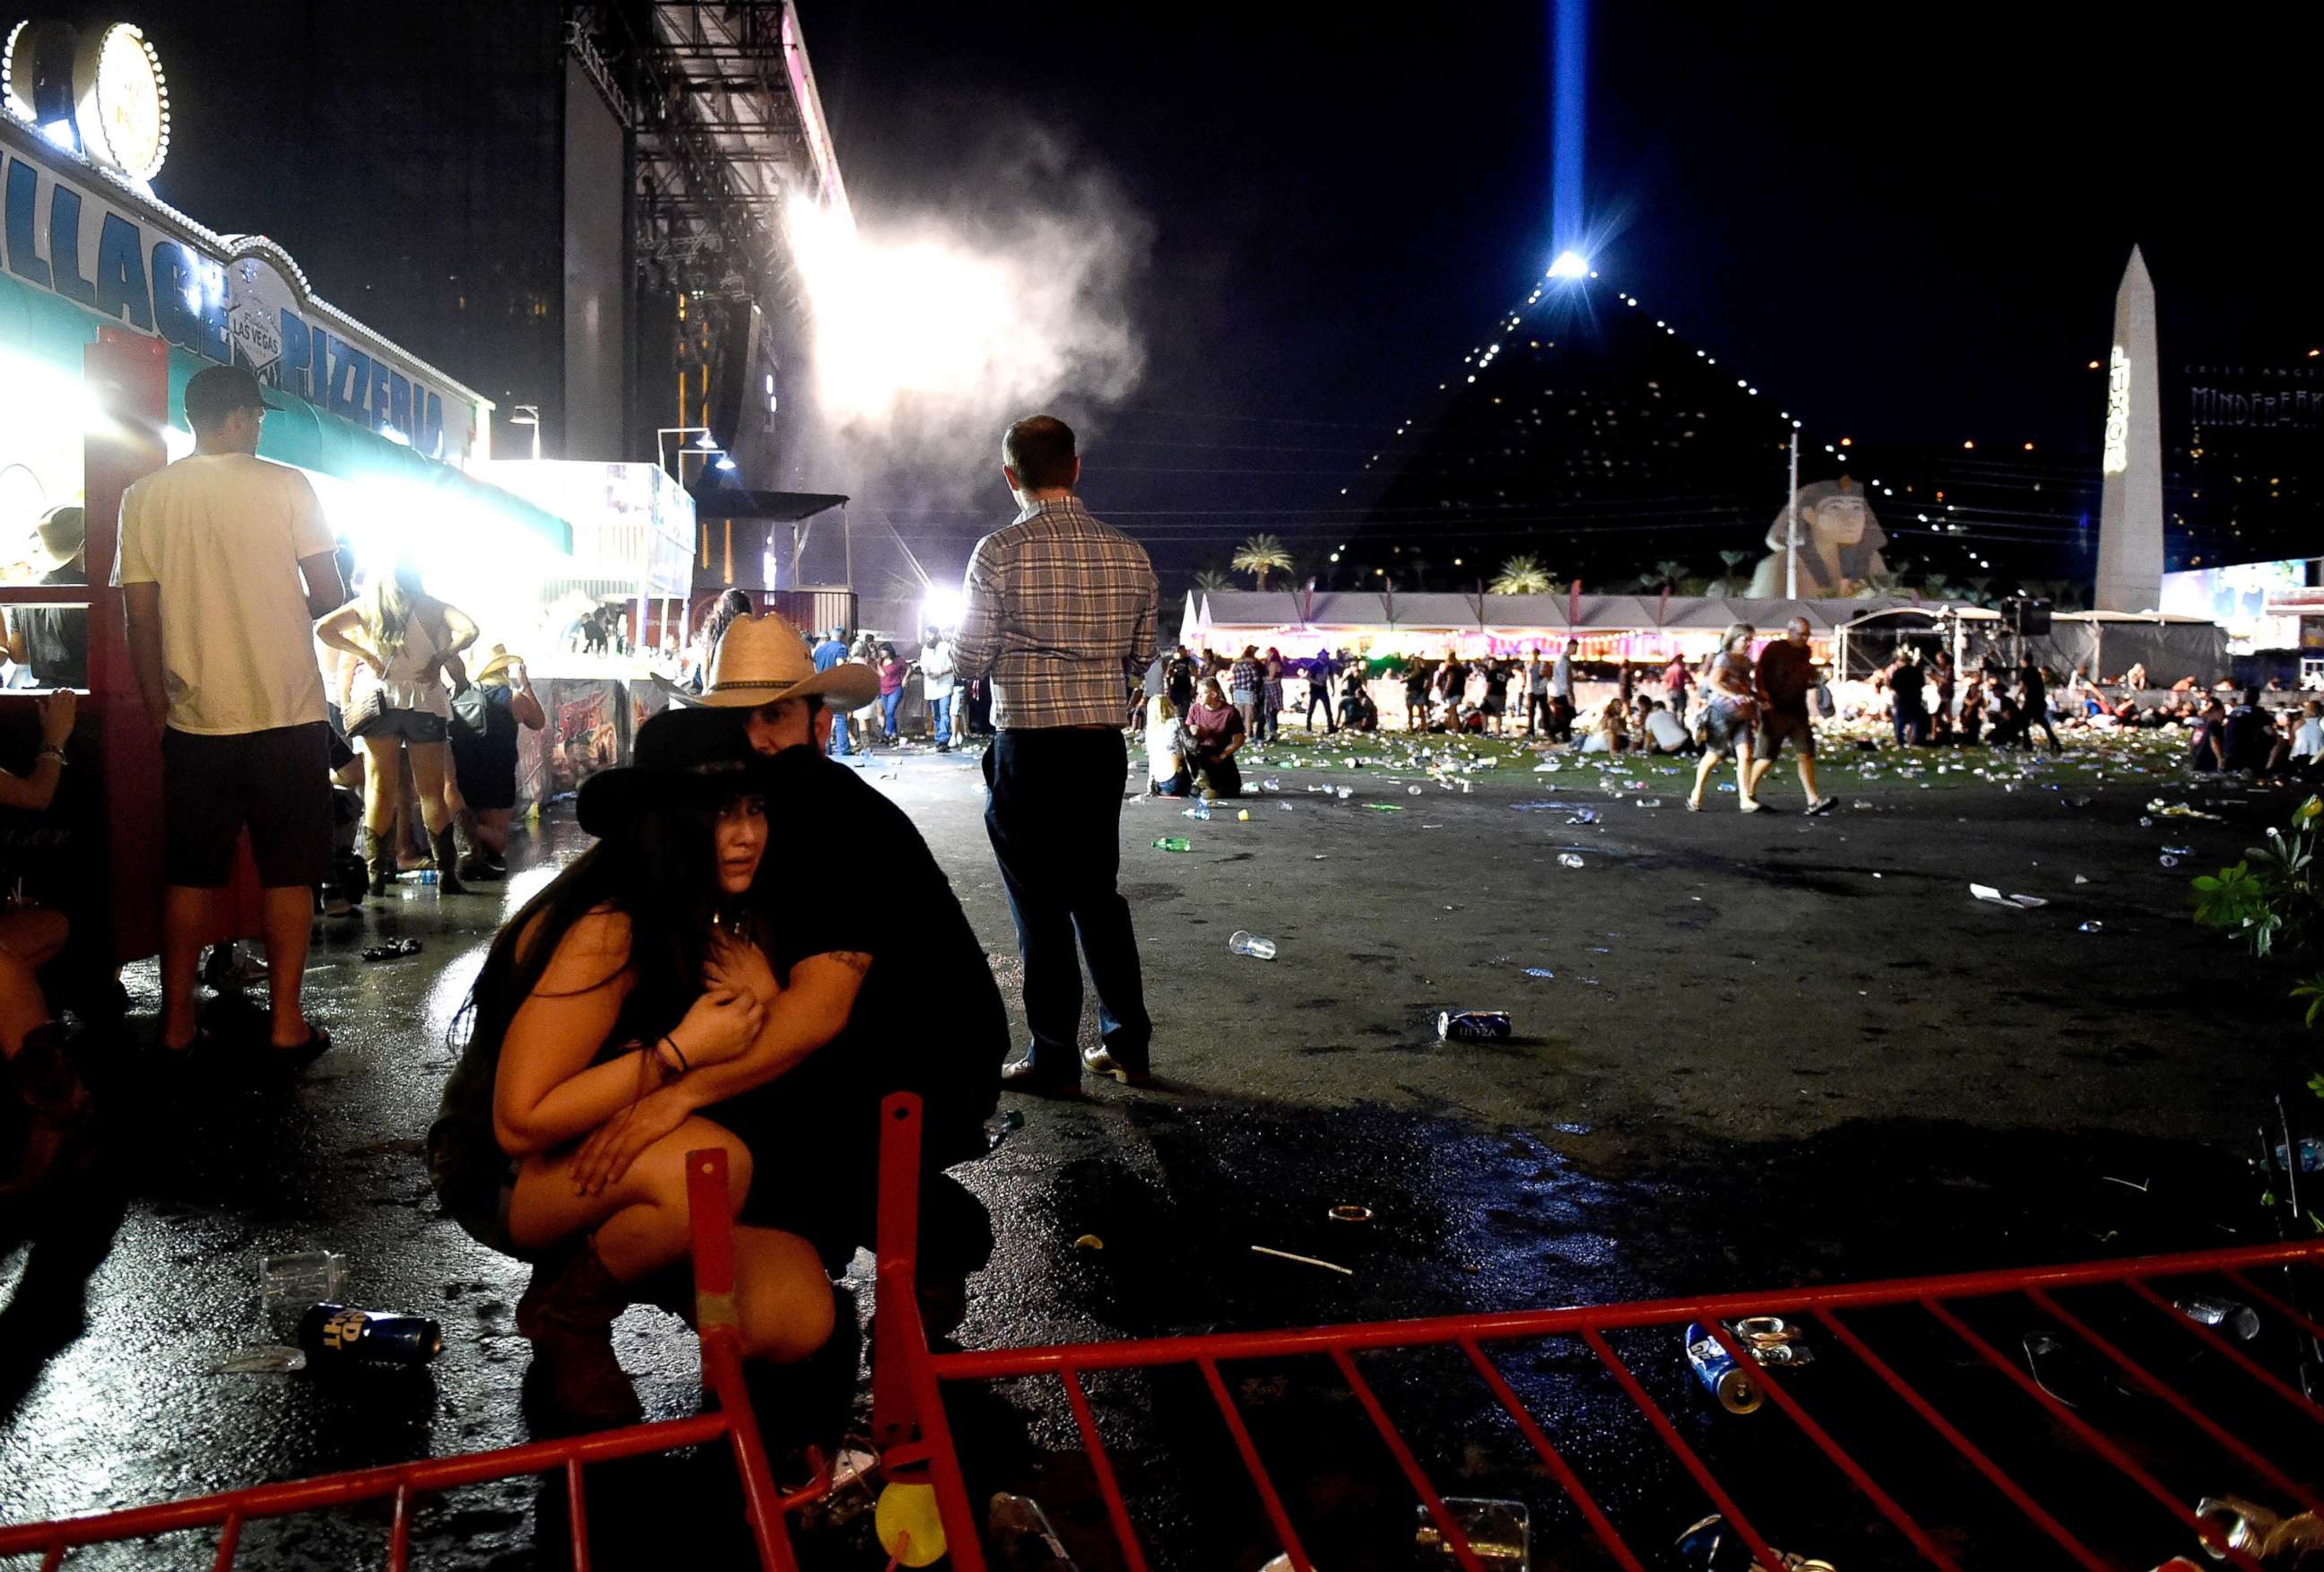 PHOTO: People take cover at the Route 91 Harvest country music festival after  gun fire was heard, Oct. 1, 2017 in Las Vegas, Nevada.  